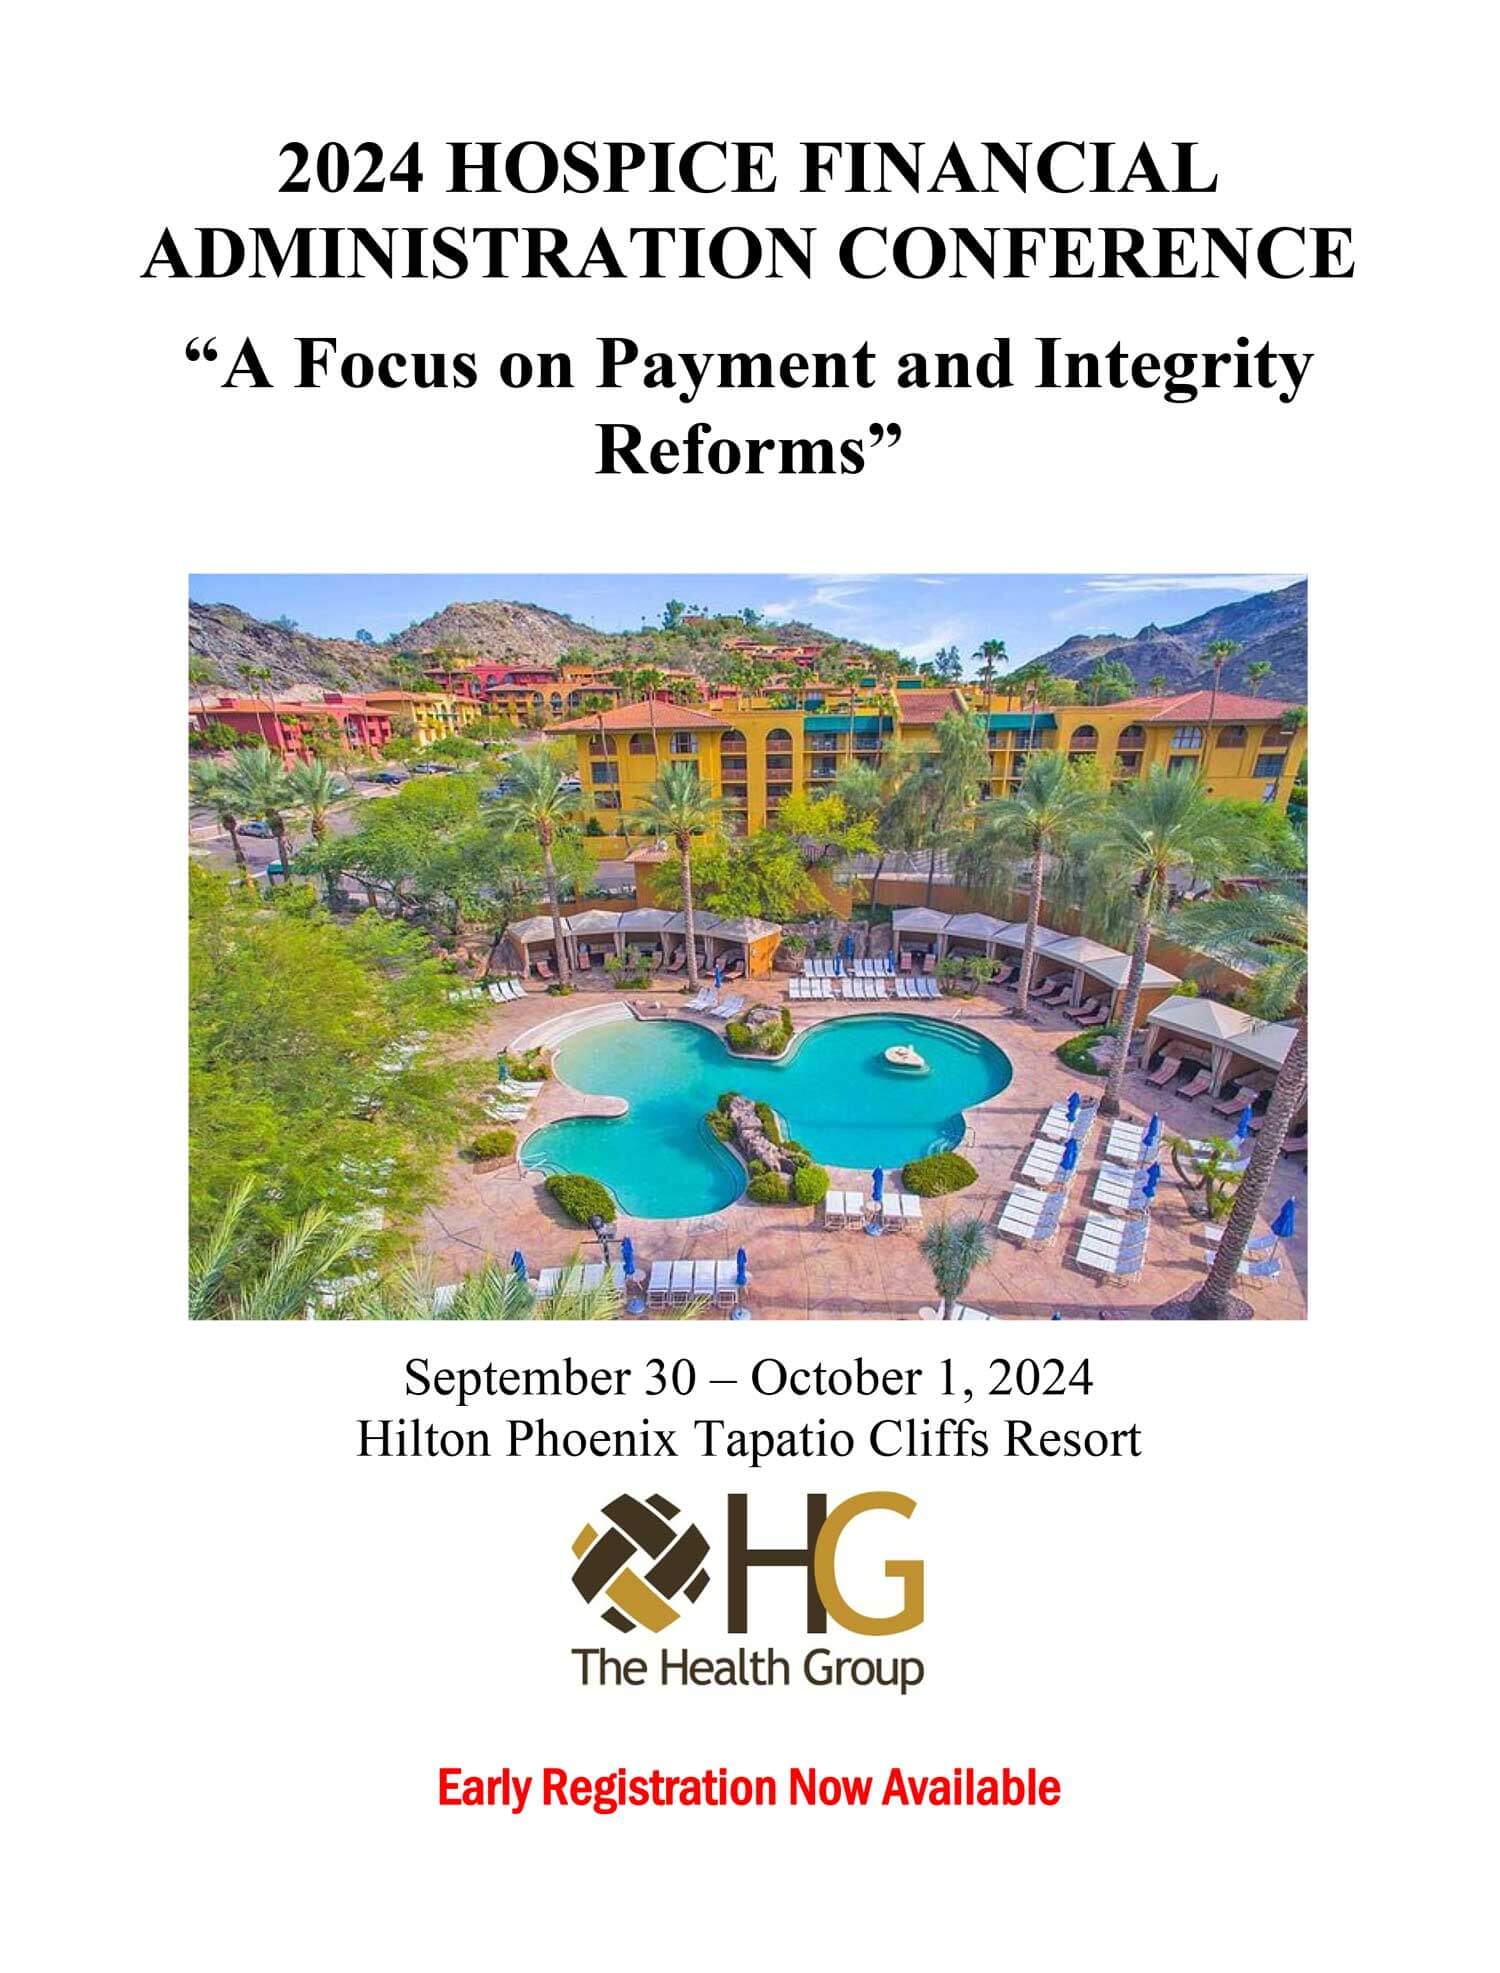  2023 Hospice Financial Administration & Management Conference